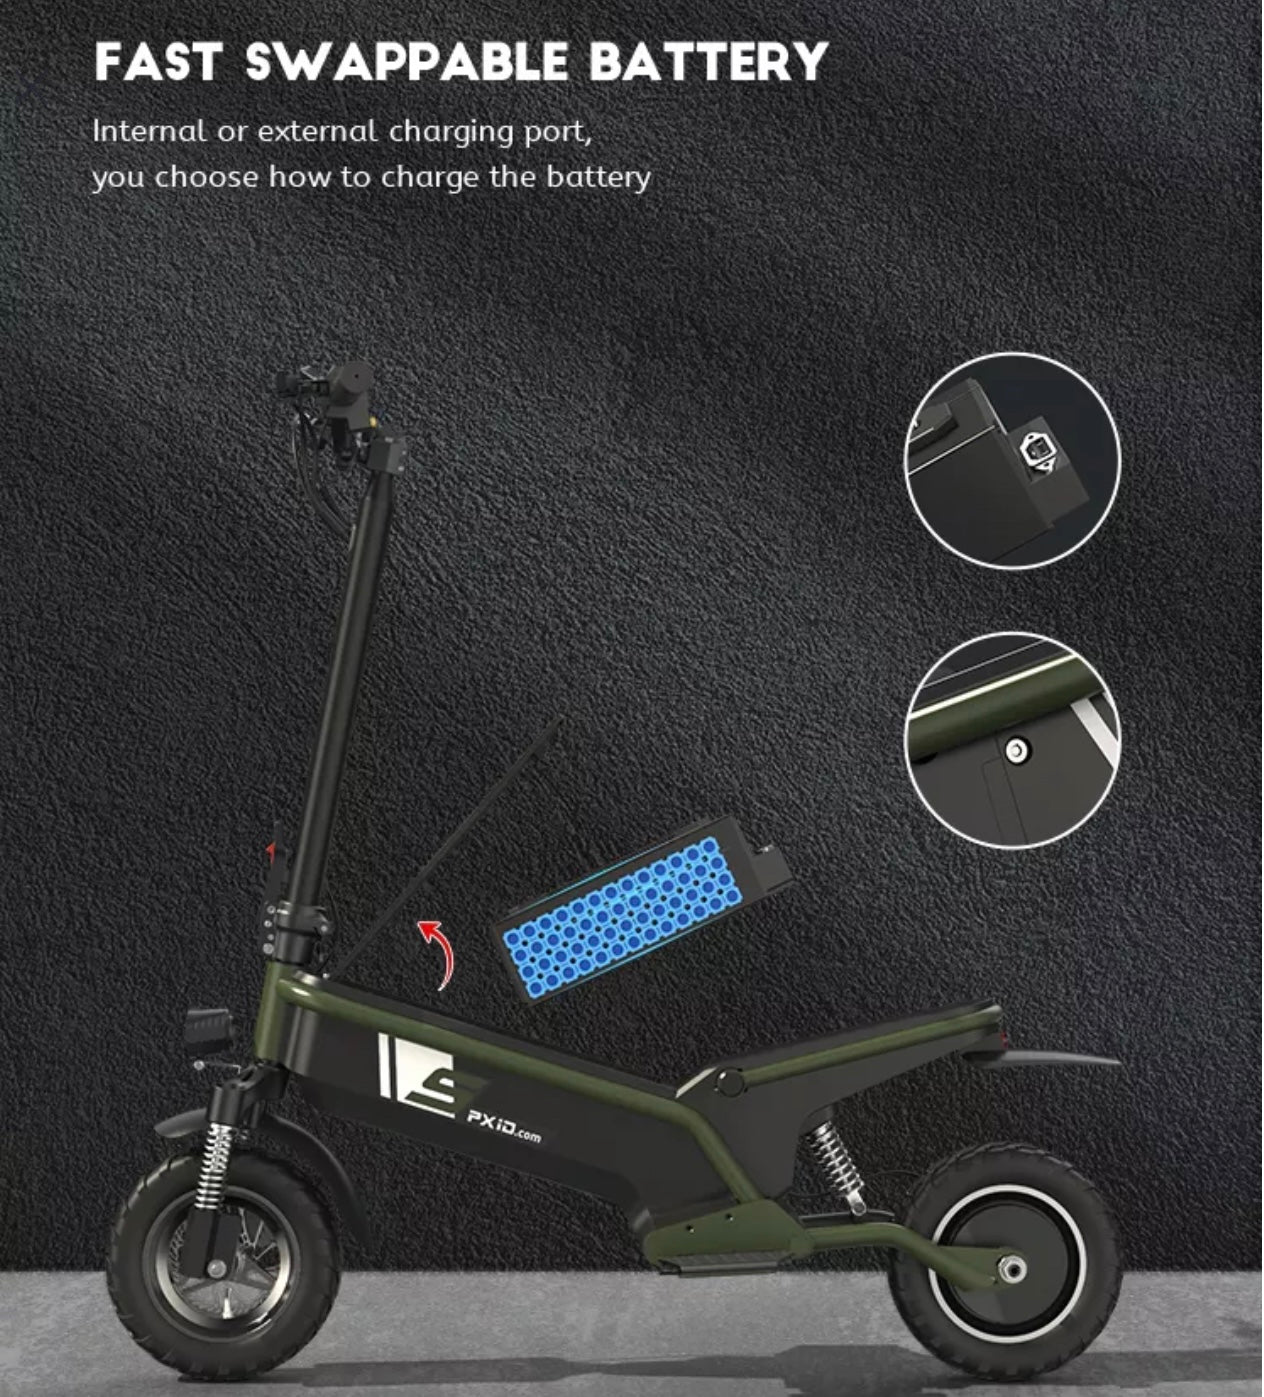 XR-Pro Electric Scooter 28mph